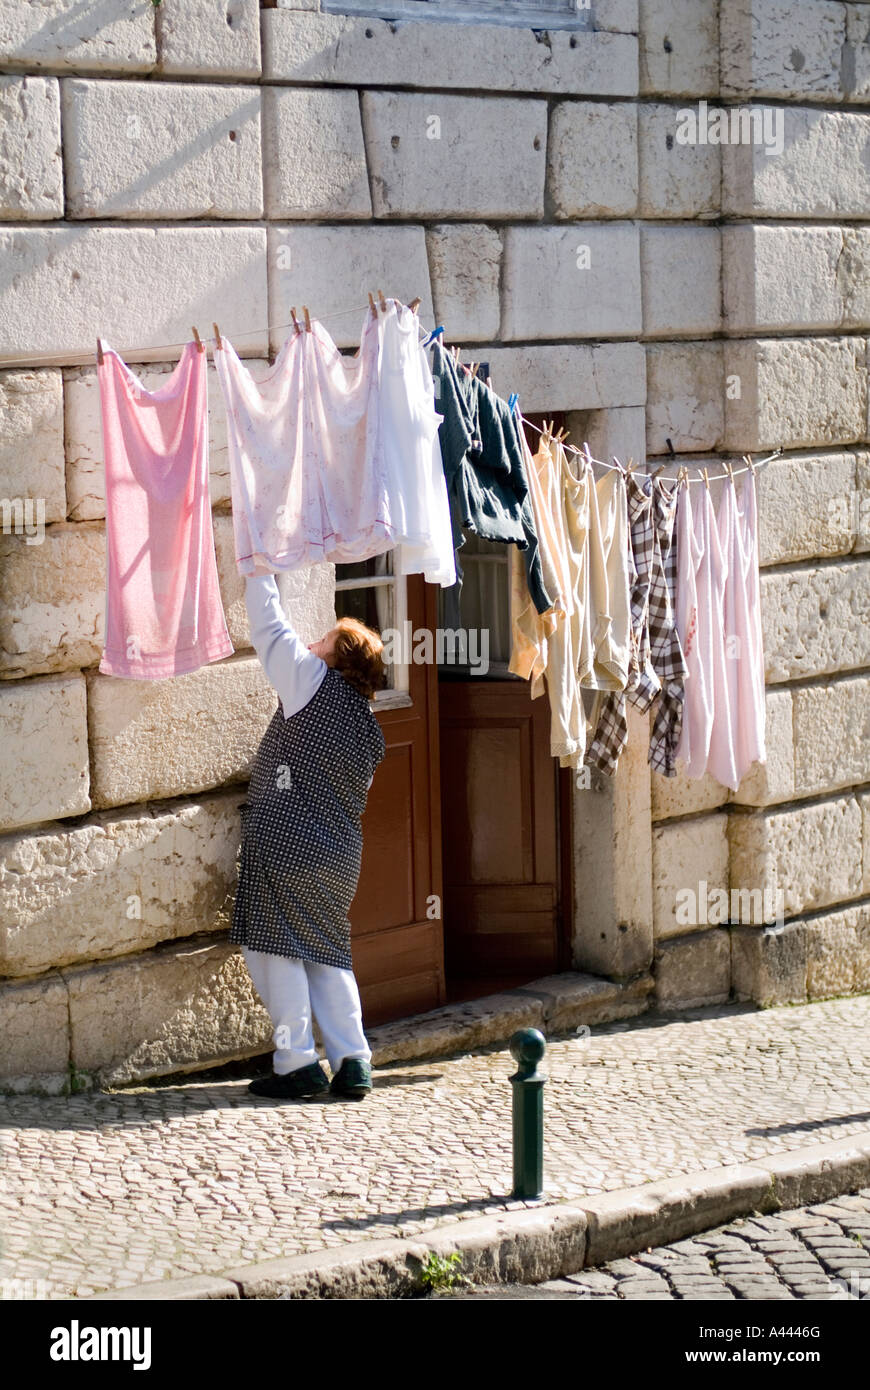 Woman hanging out washing to dry outside on the pavement in the ALFAMA  district of Lisbon Portugal Stock Photo - Alamy